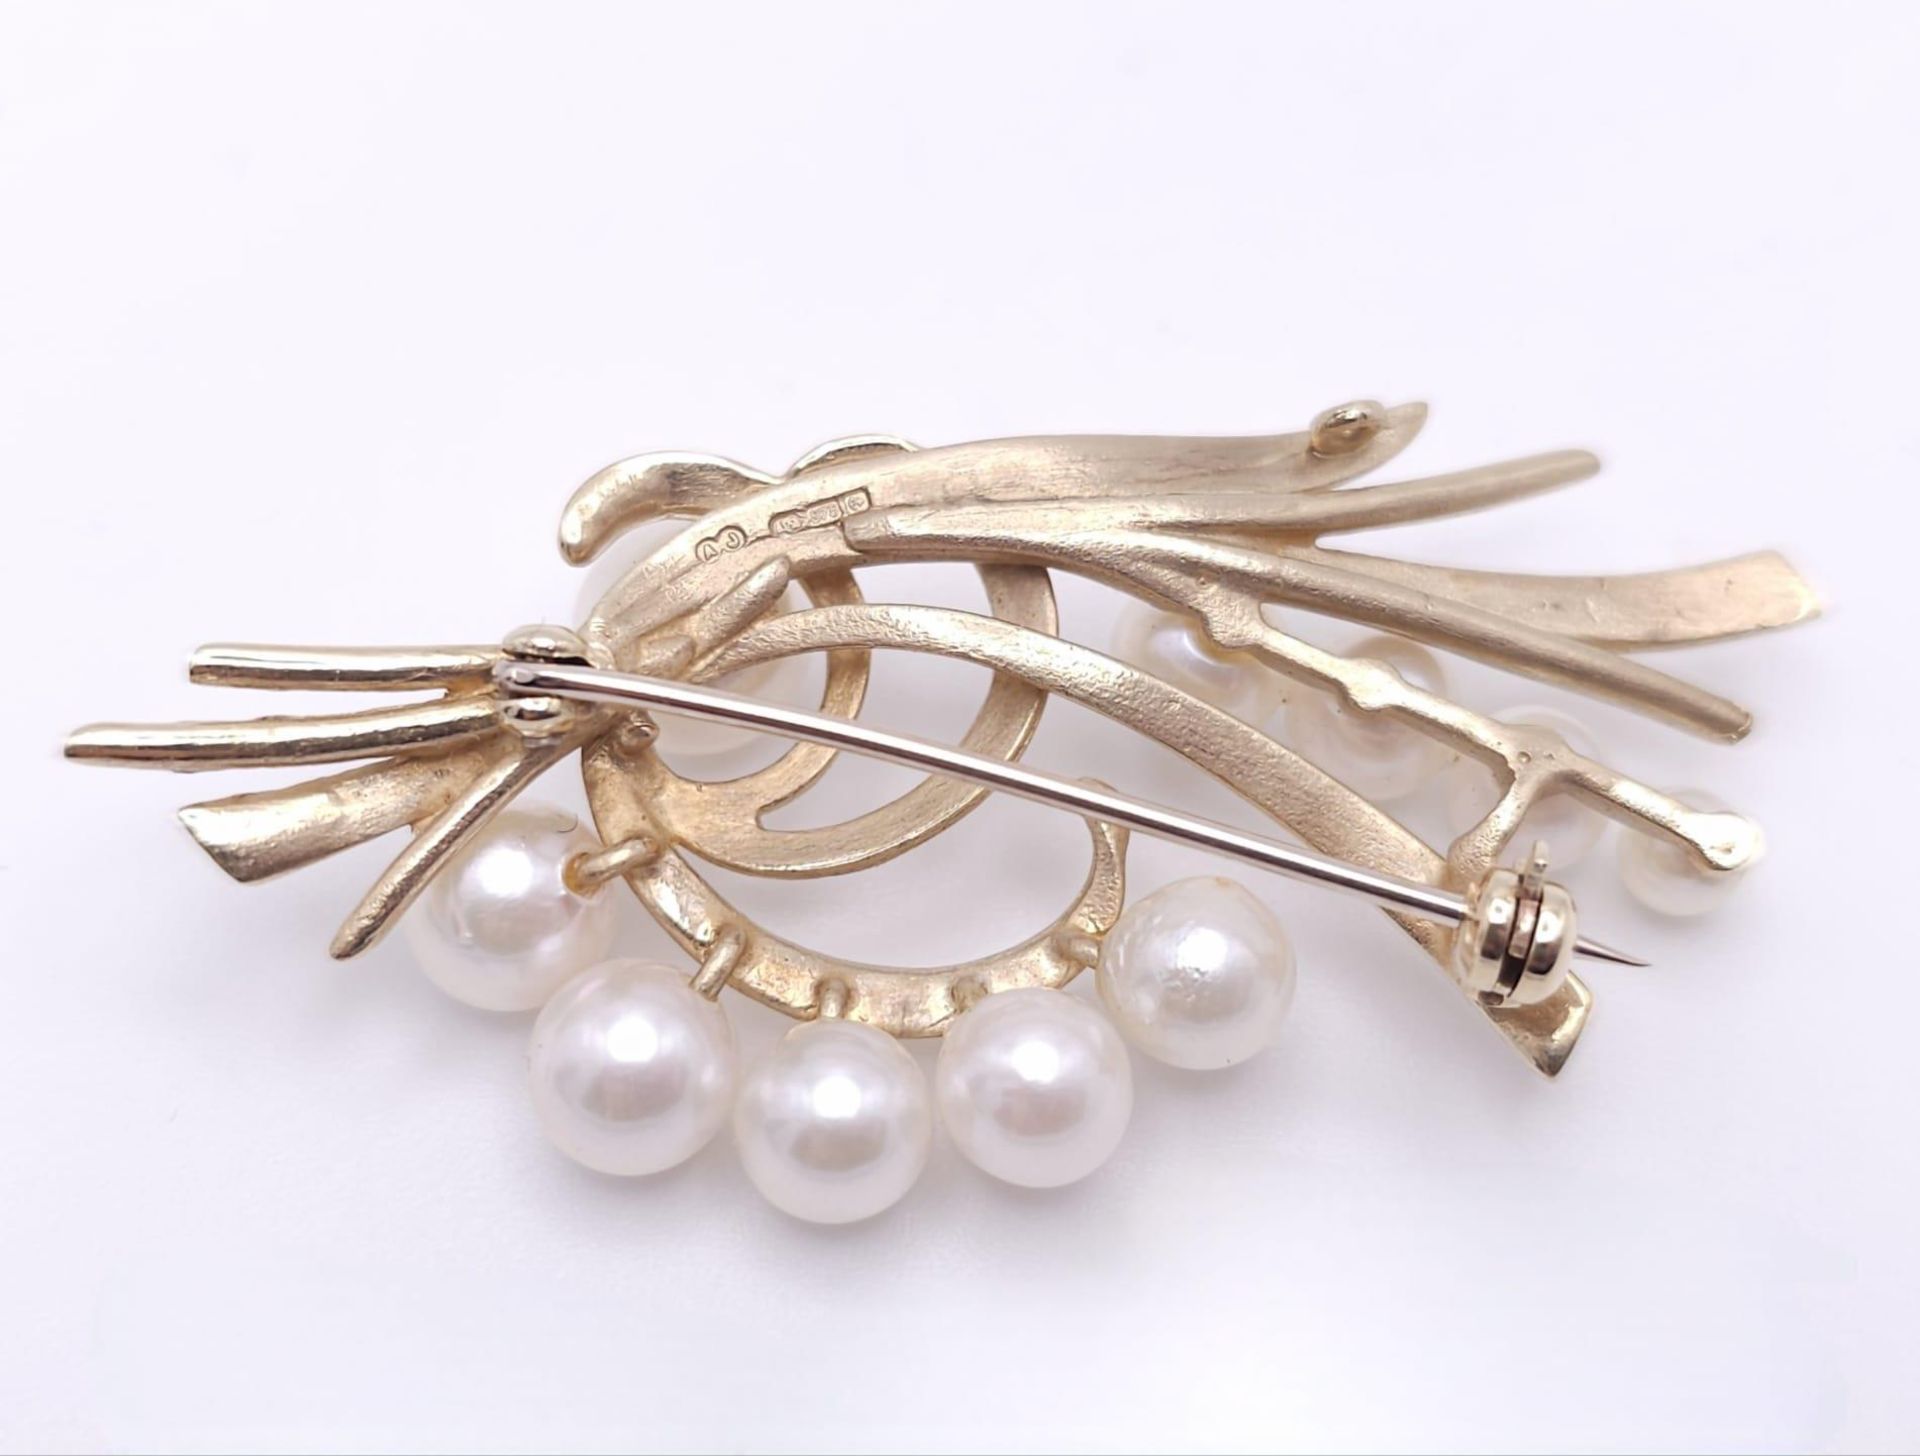 A 9k Yellow Gold and Pearl Decorative Floral Brooch. 5cm. 8g weight - Image 15 of 23